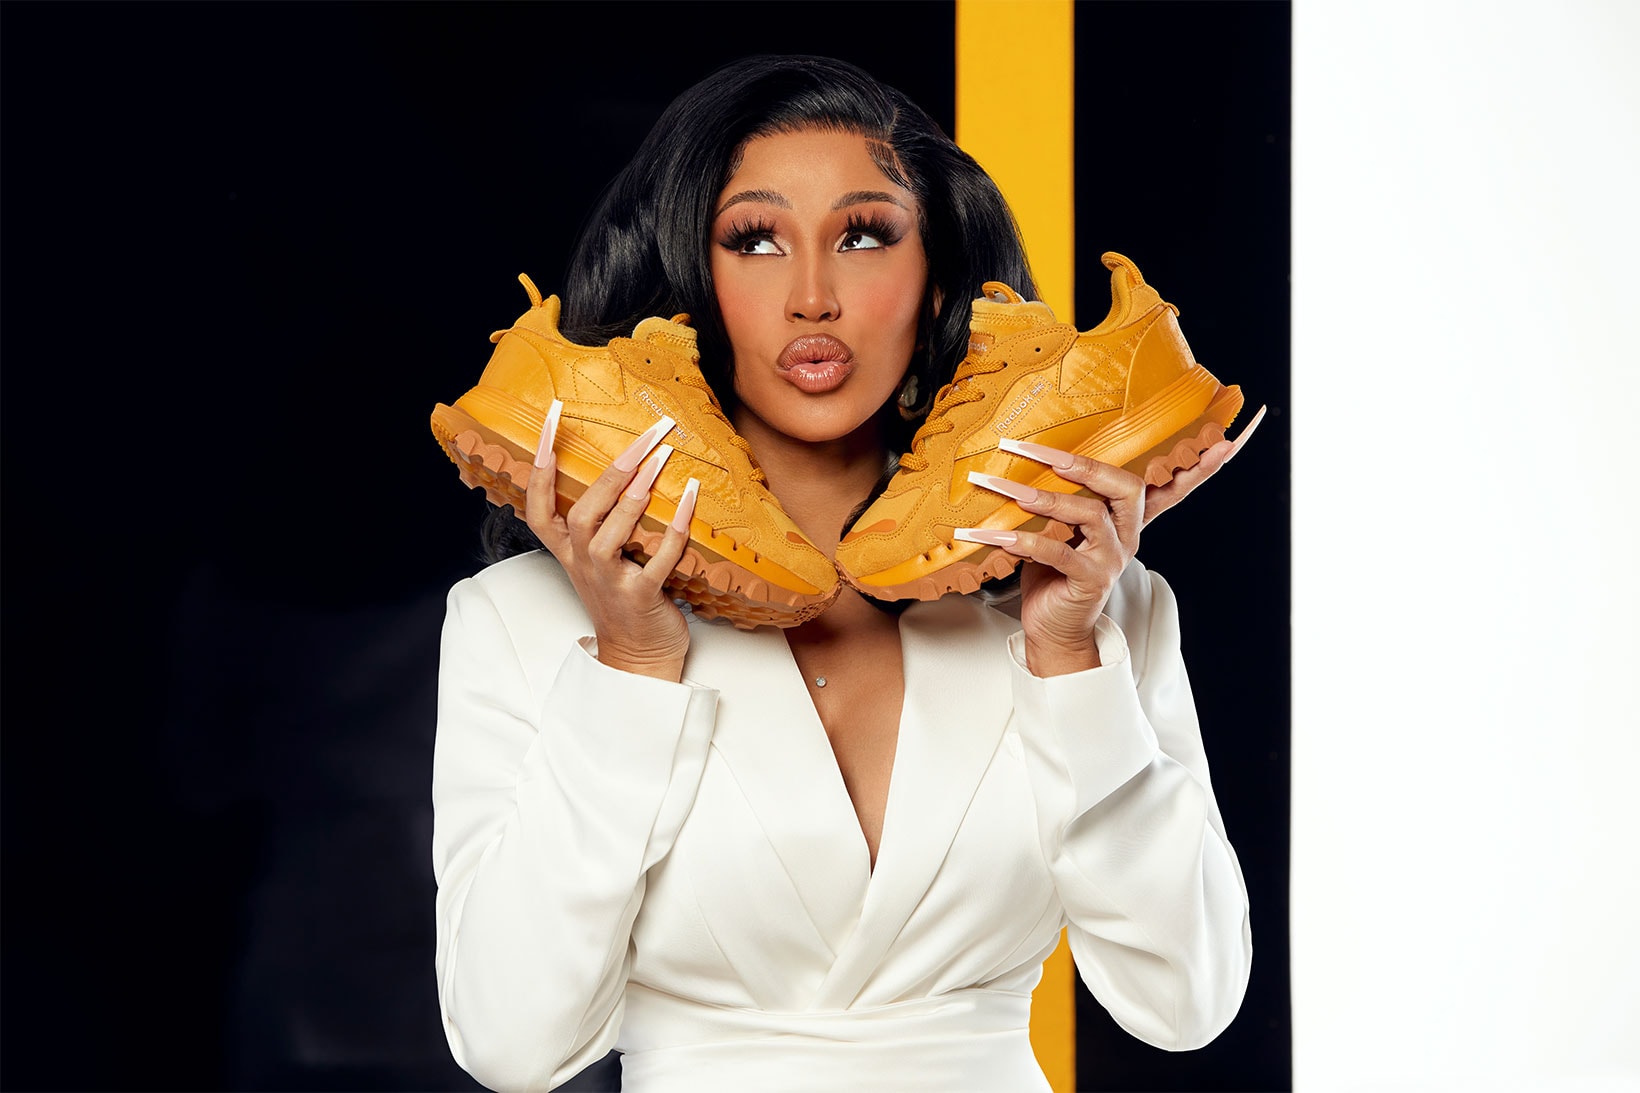 Reebok Cardi B Classic Leather Gold Sneakers Collaboration Campaign